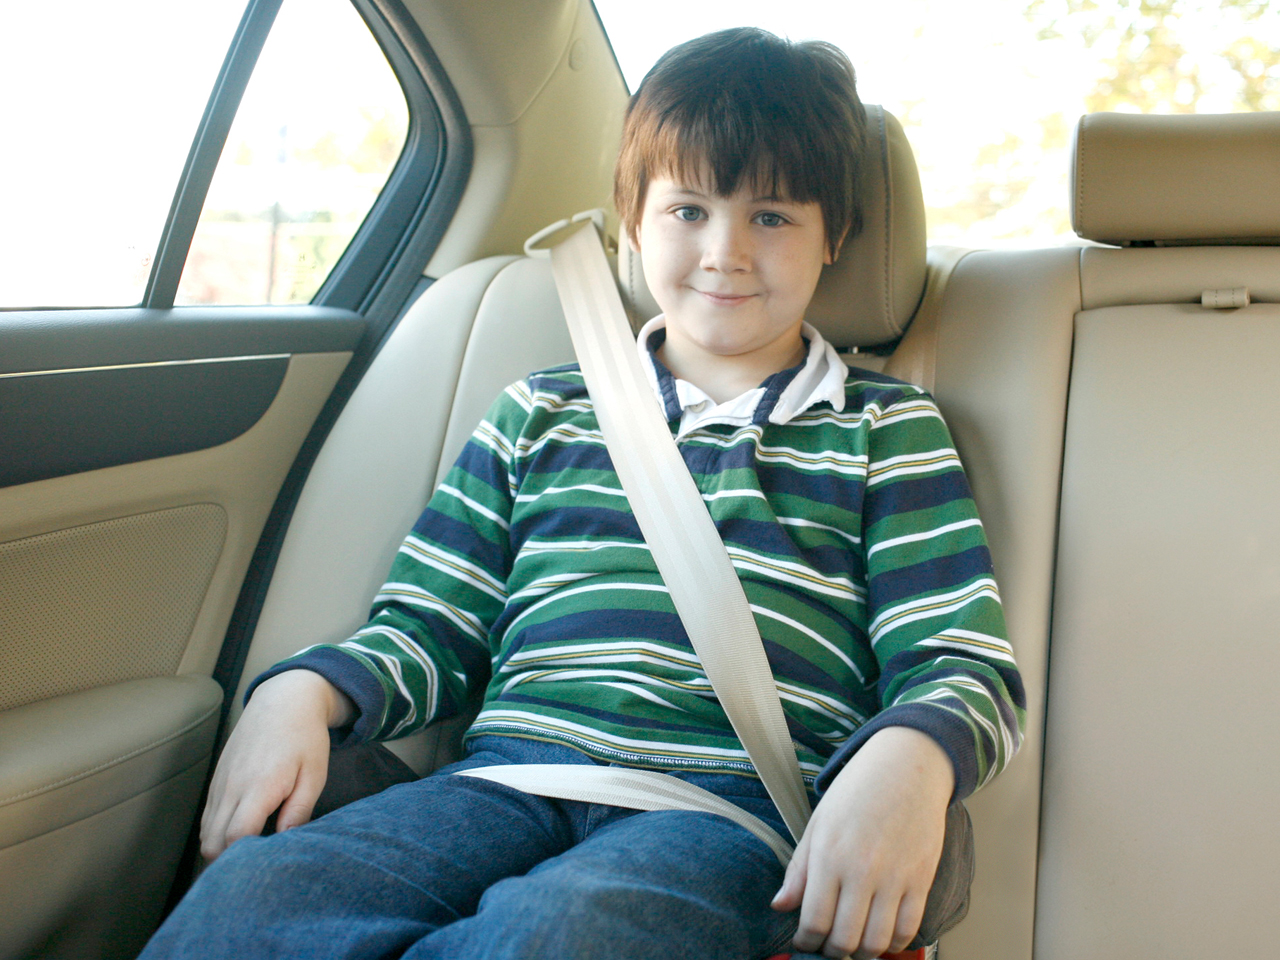 Quebec S Car Seat Laws Are Changing, When Did Child Car Seats Become Mandatory In Canada